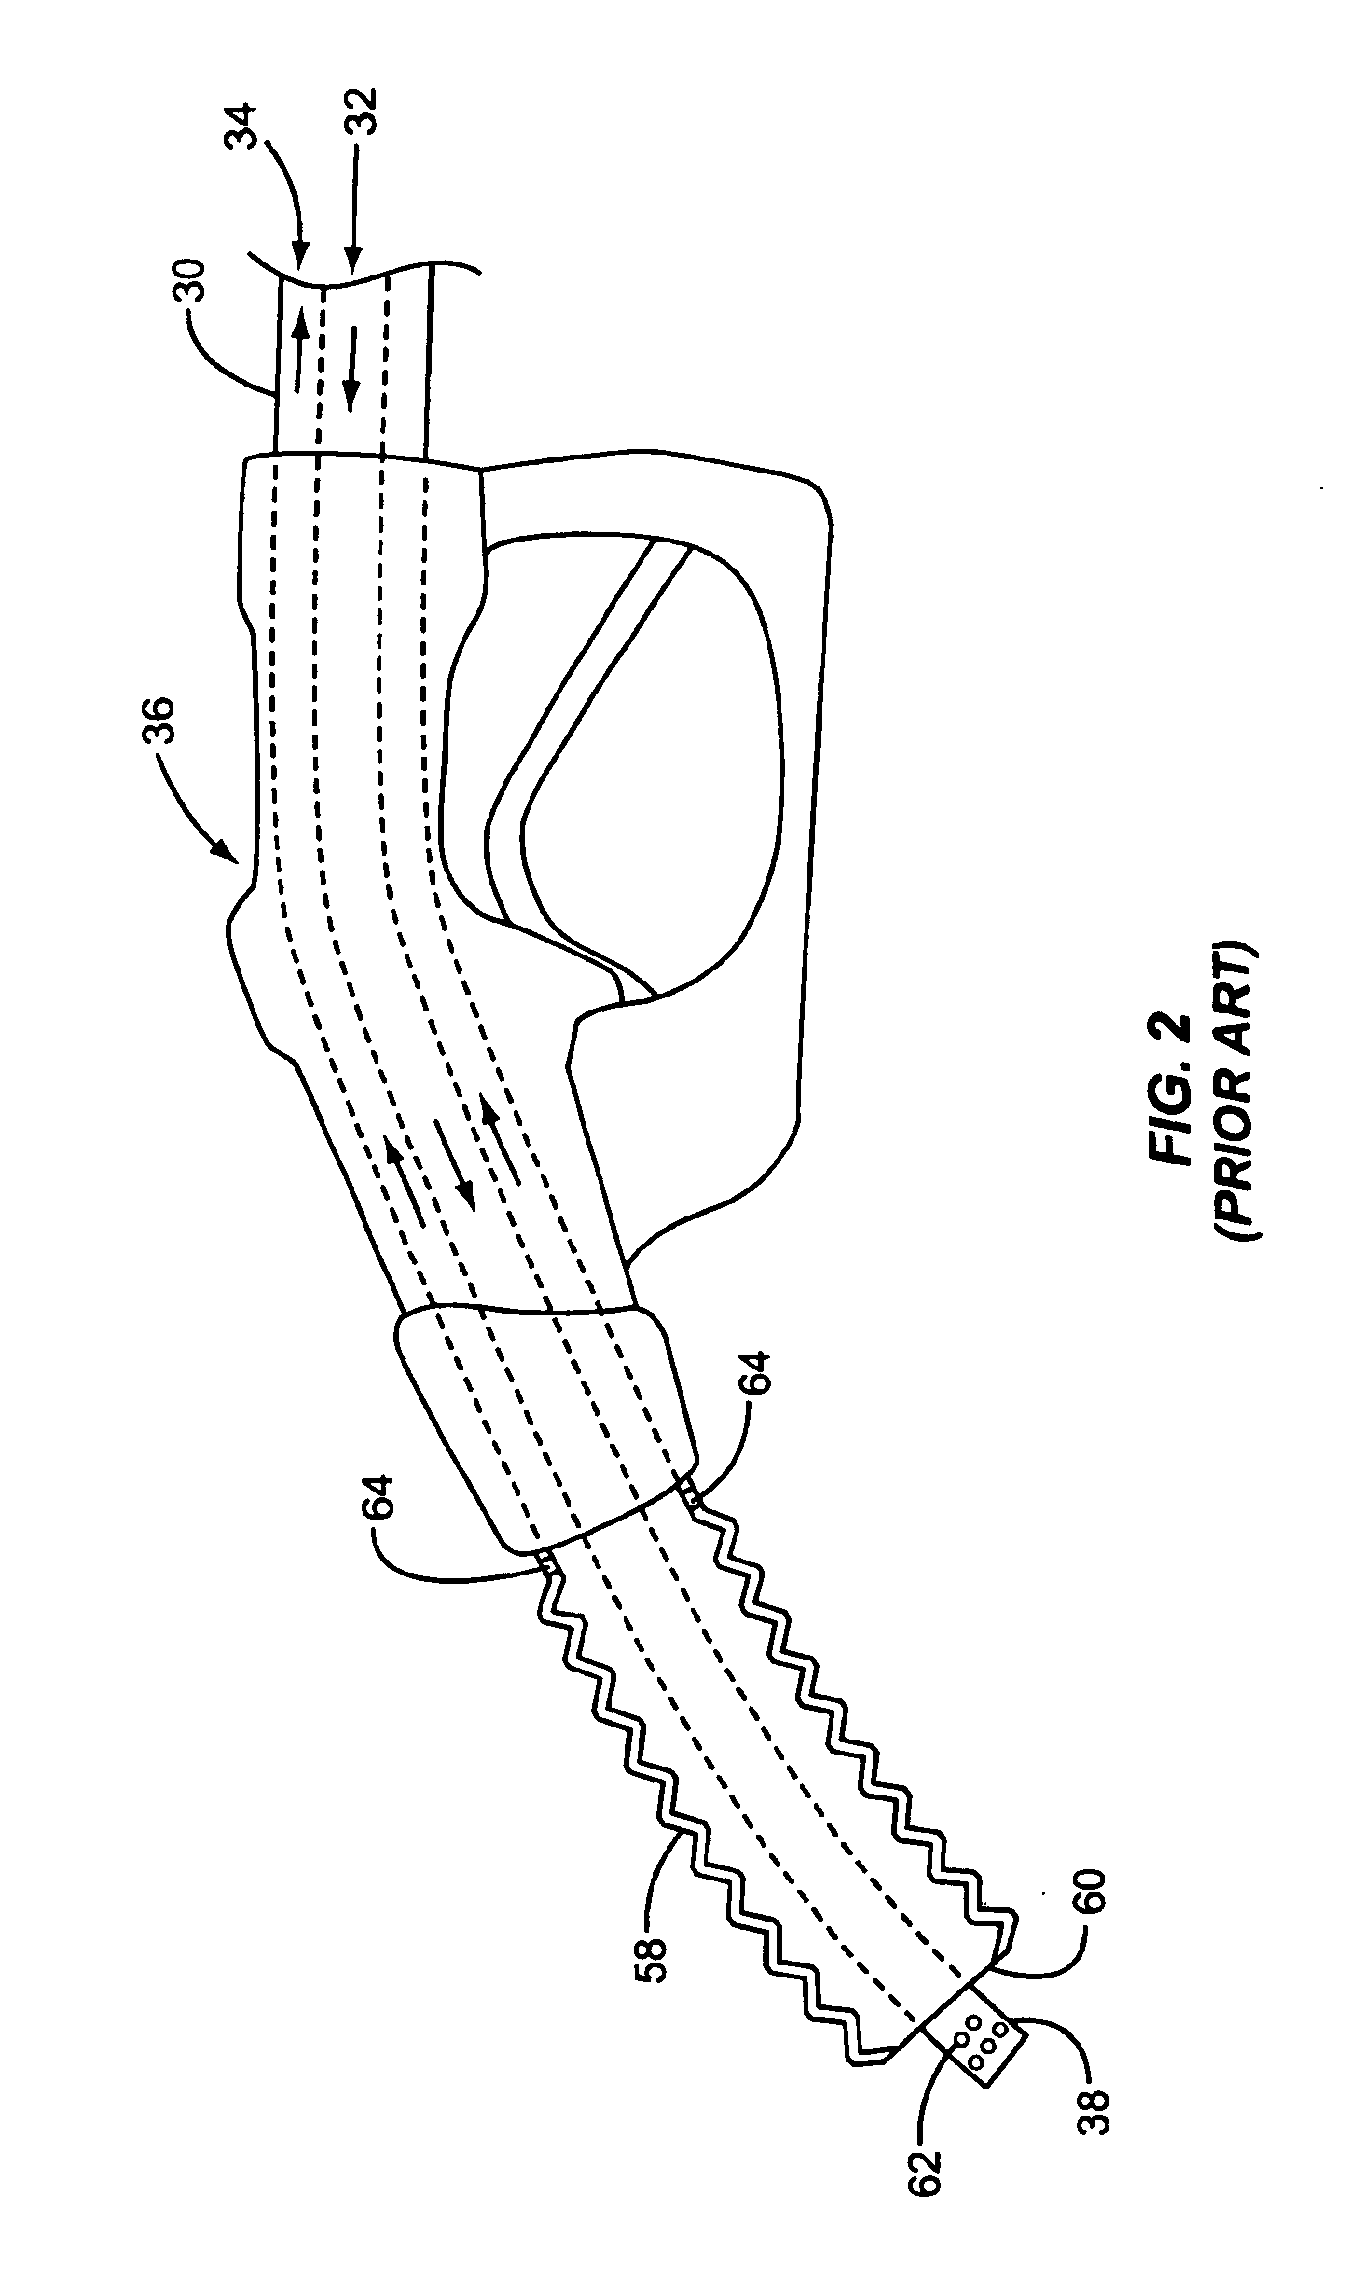 Vapor recovery system with ORVR compensation